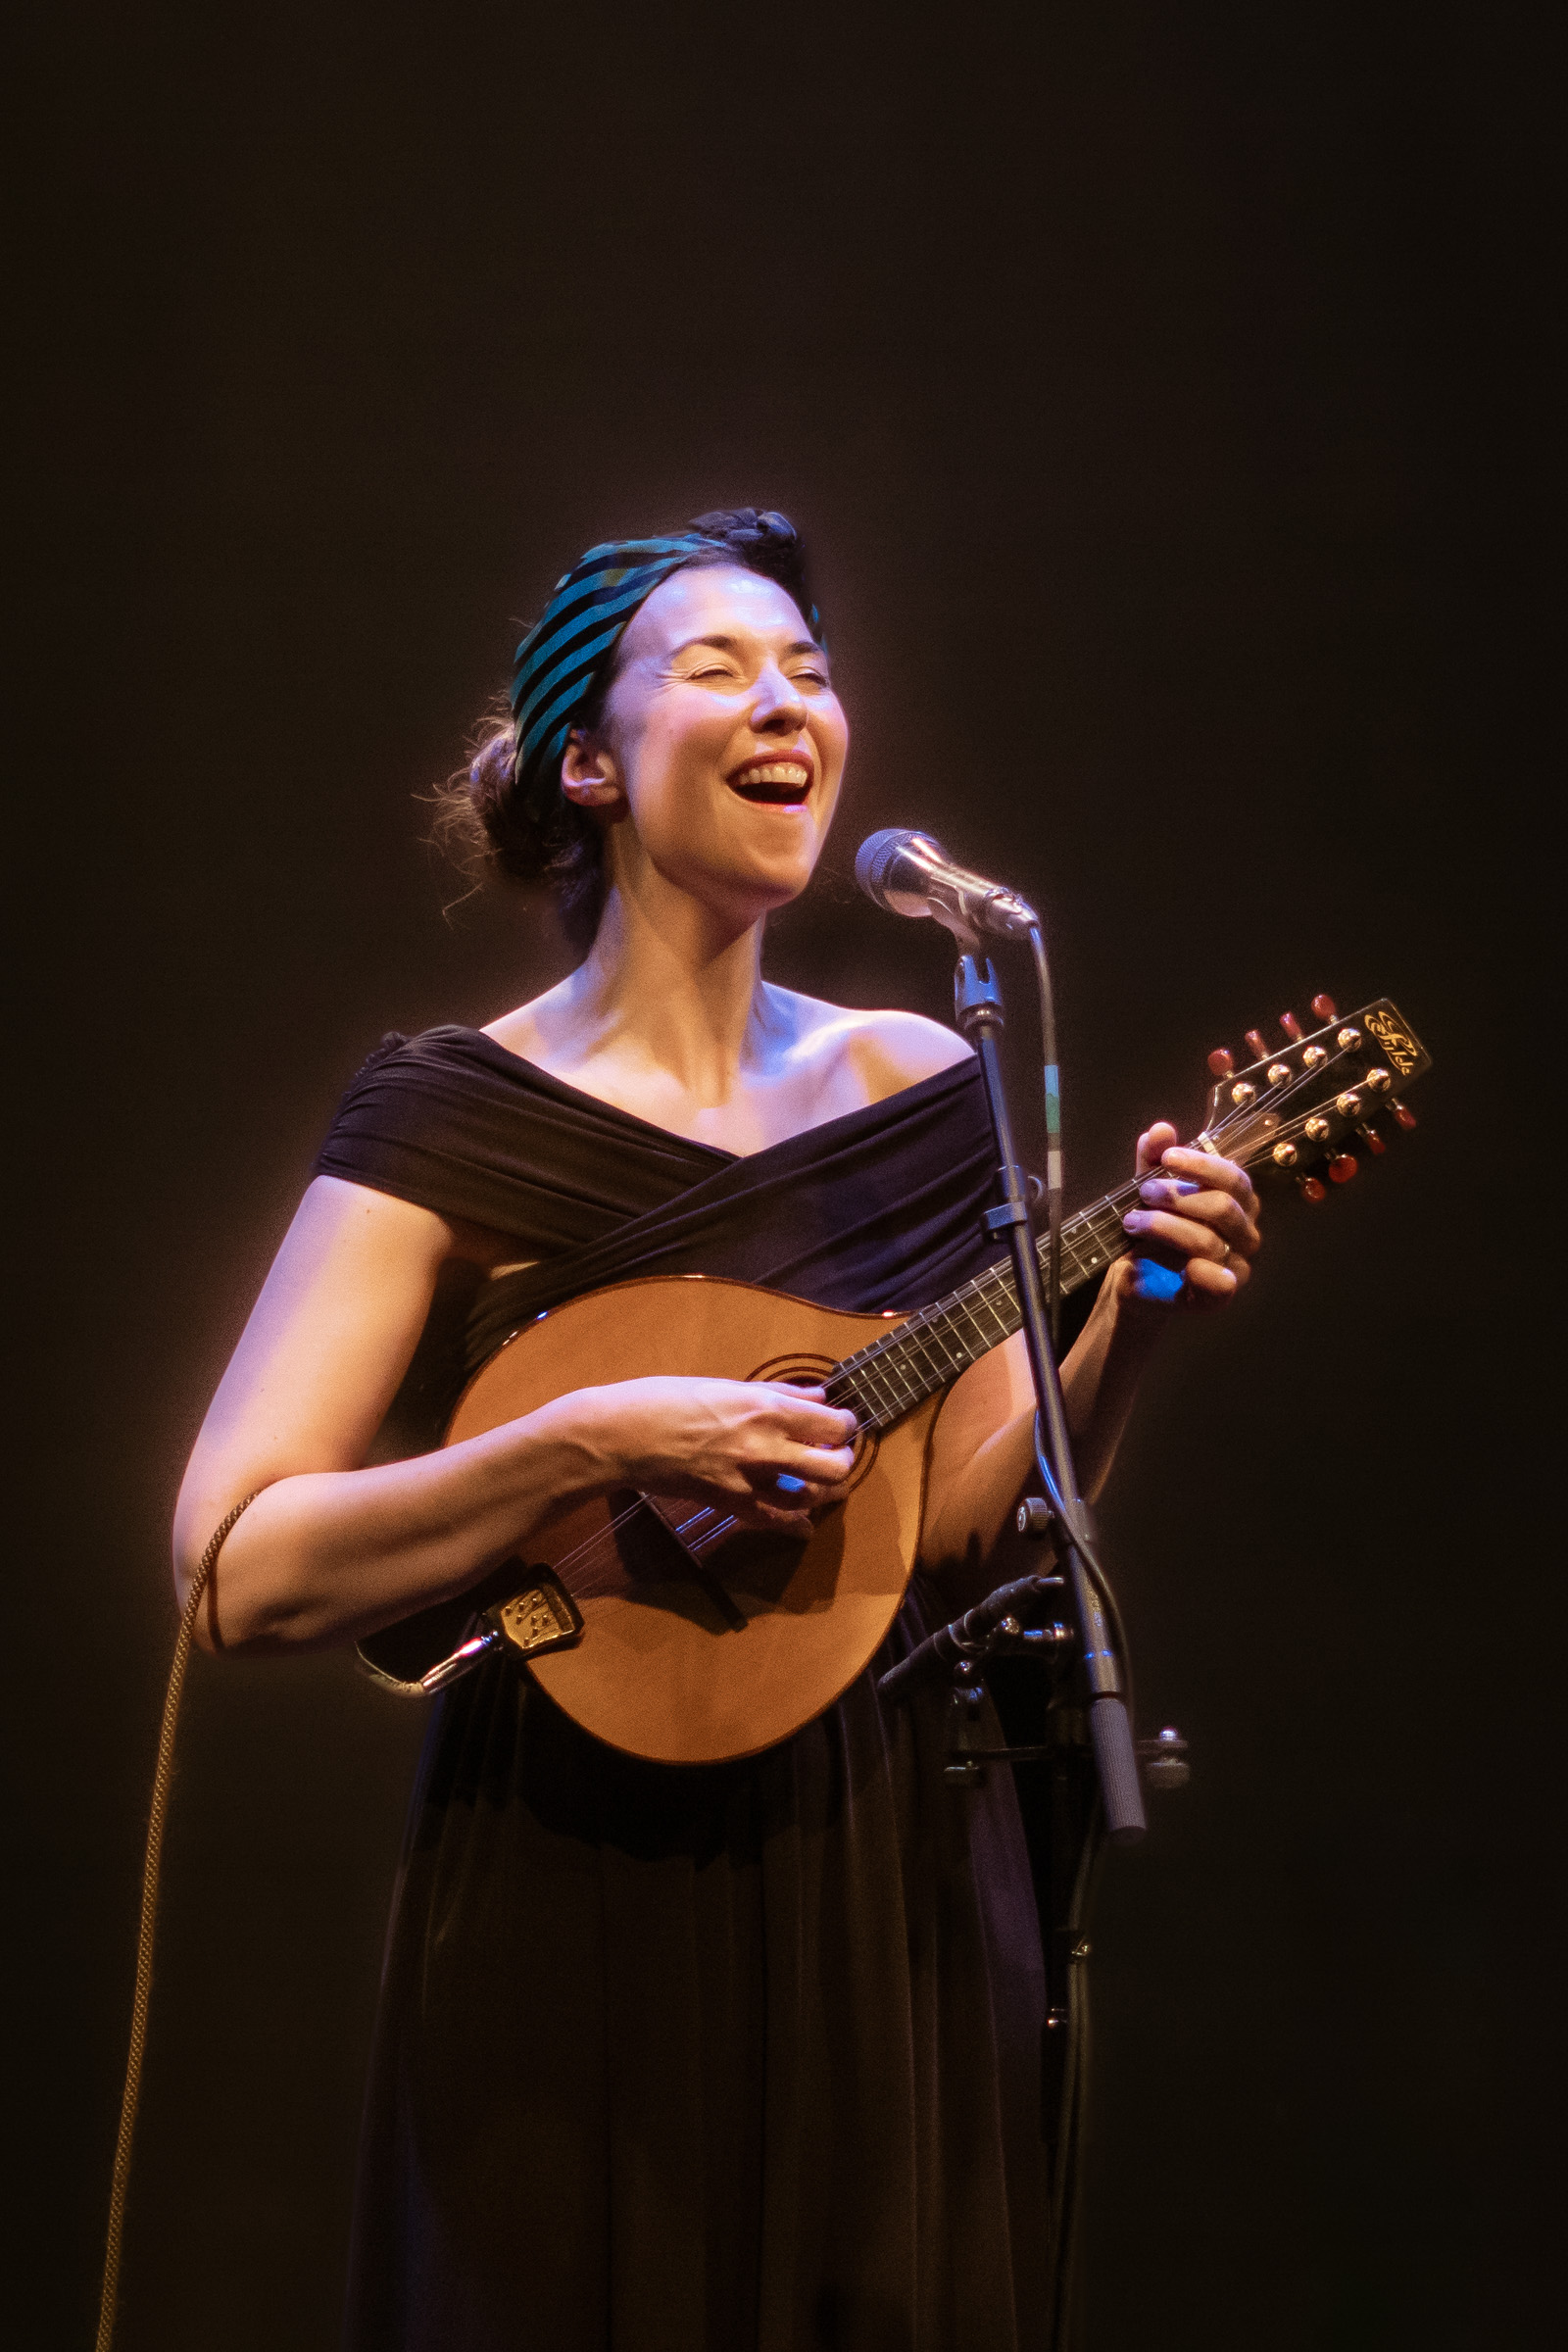 Lisa Hannigan playing live in the pavilion theatre Dun Laoghaire 2022, photographed by Caroline Vandekerckhove for dimly lit stages